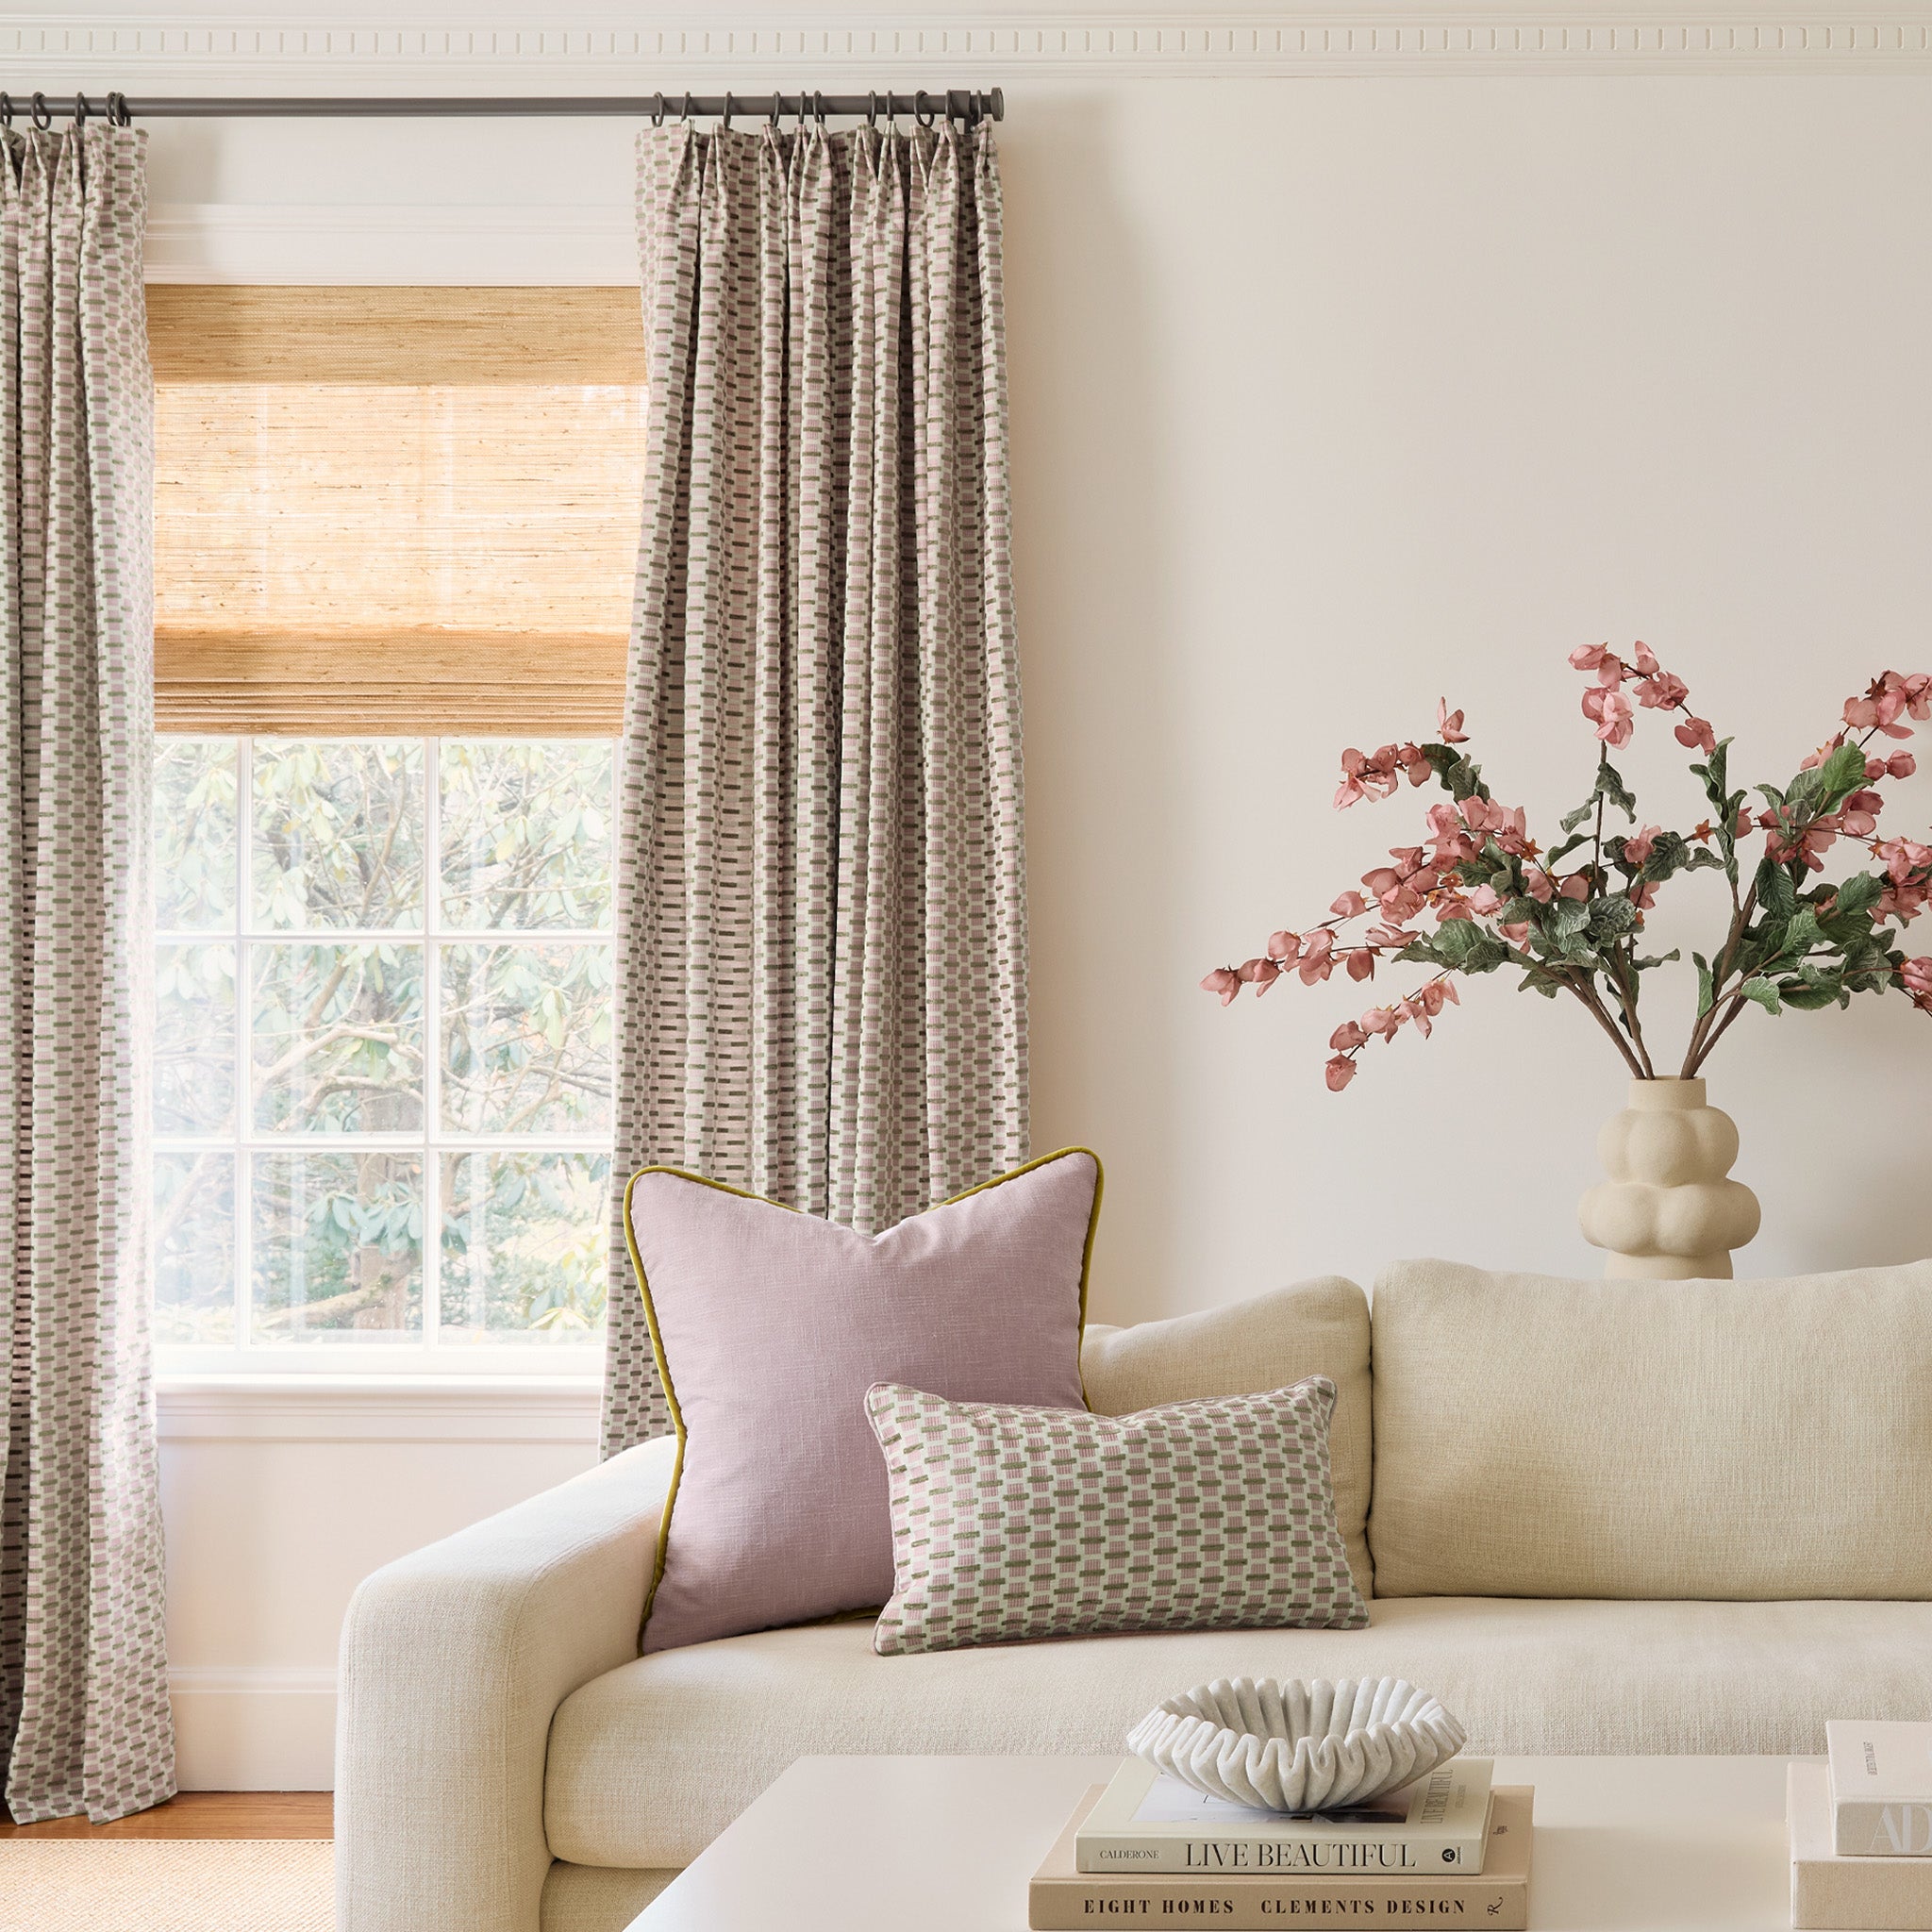  chenille and woven jacquard pink and citron geometric curtains on a metal rod in front of an illuminated window with a white couch and flowers in front